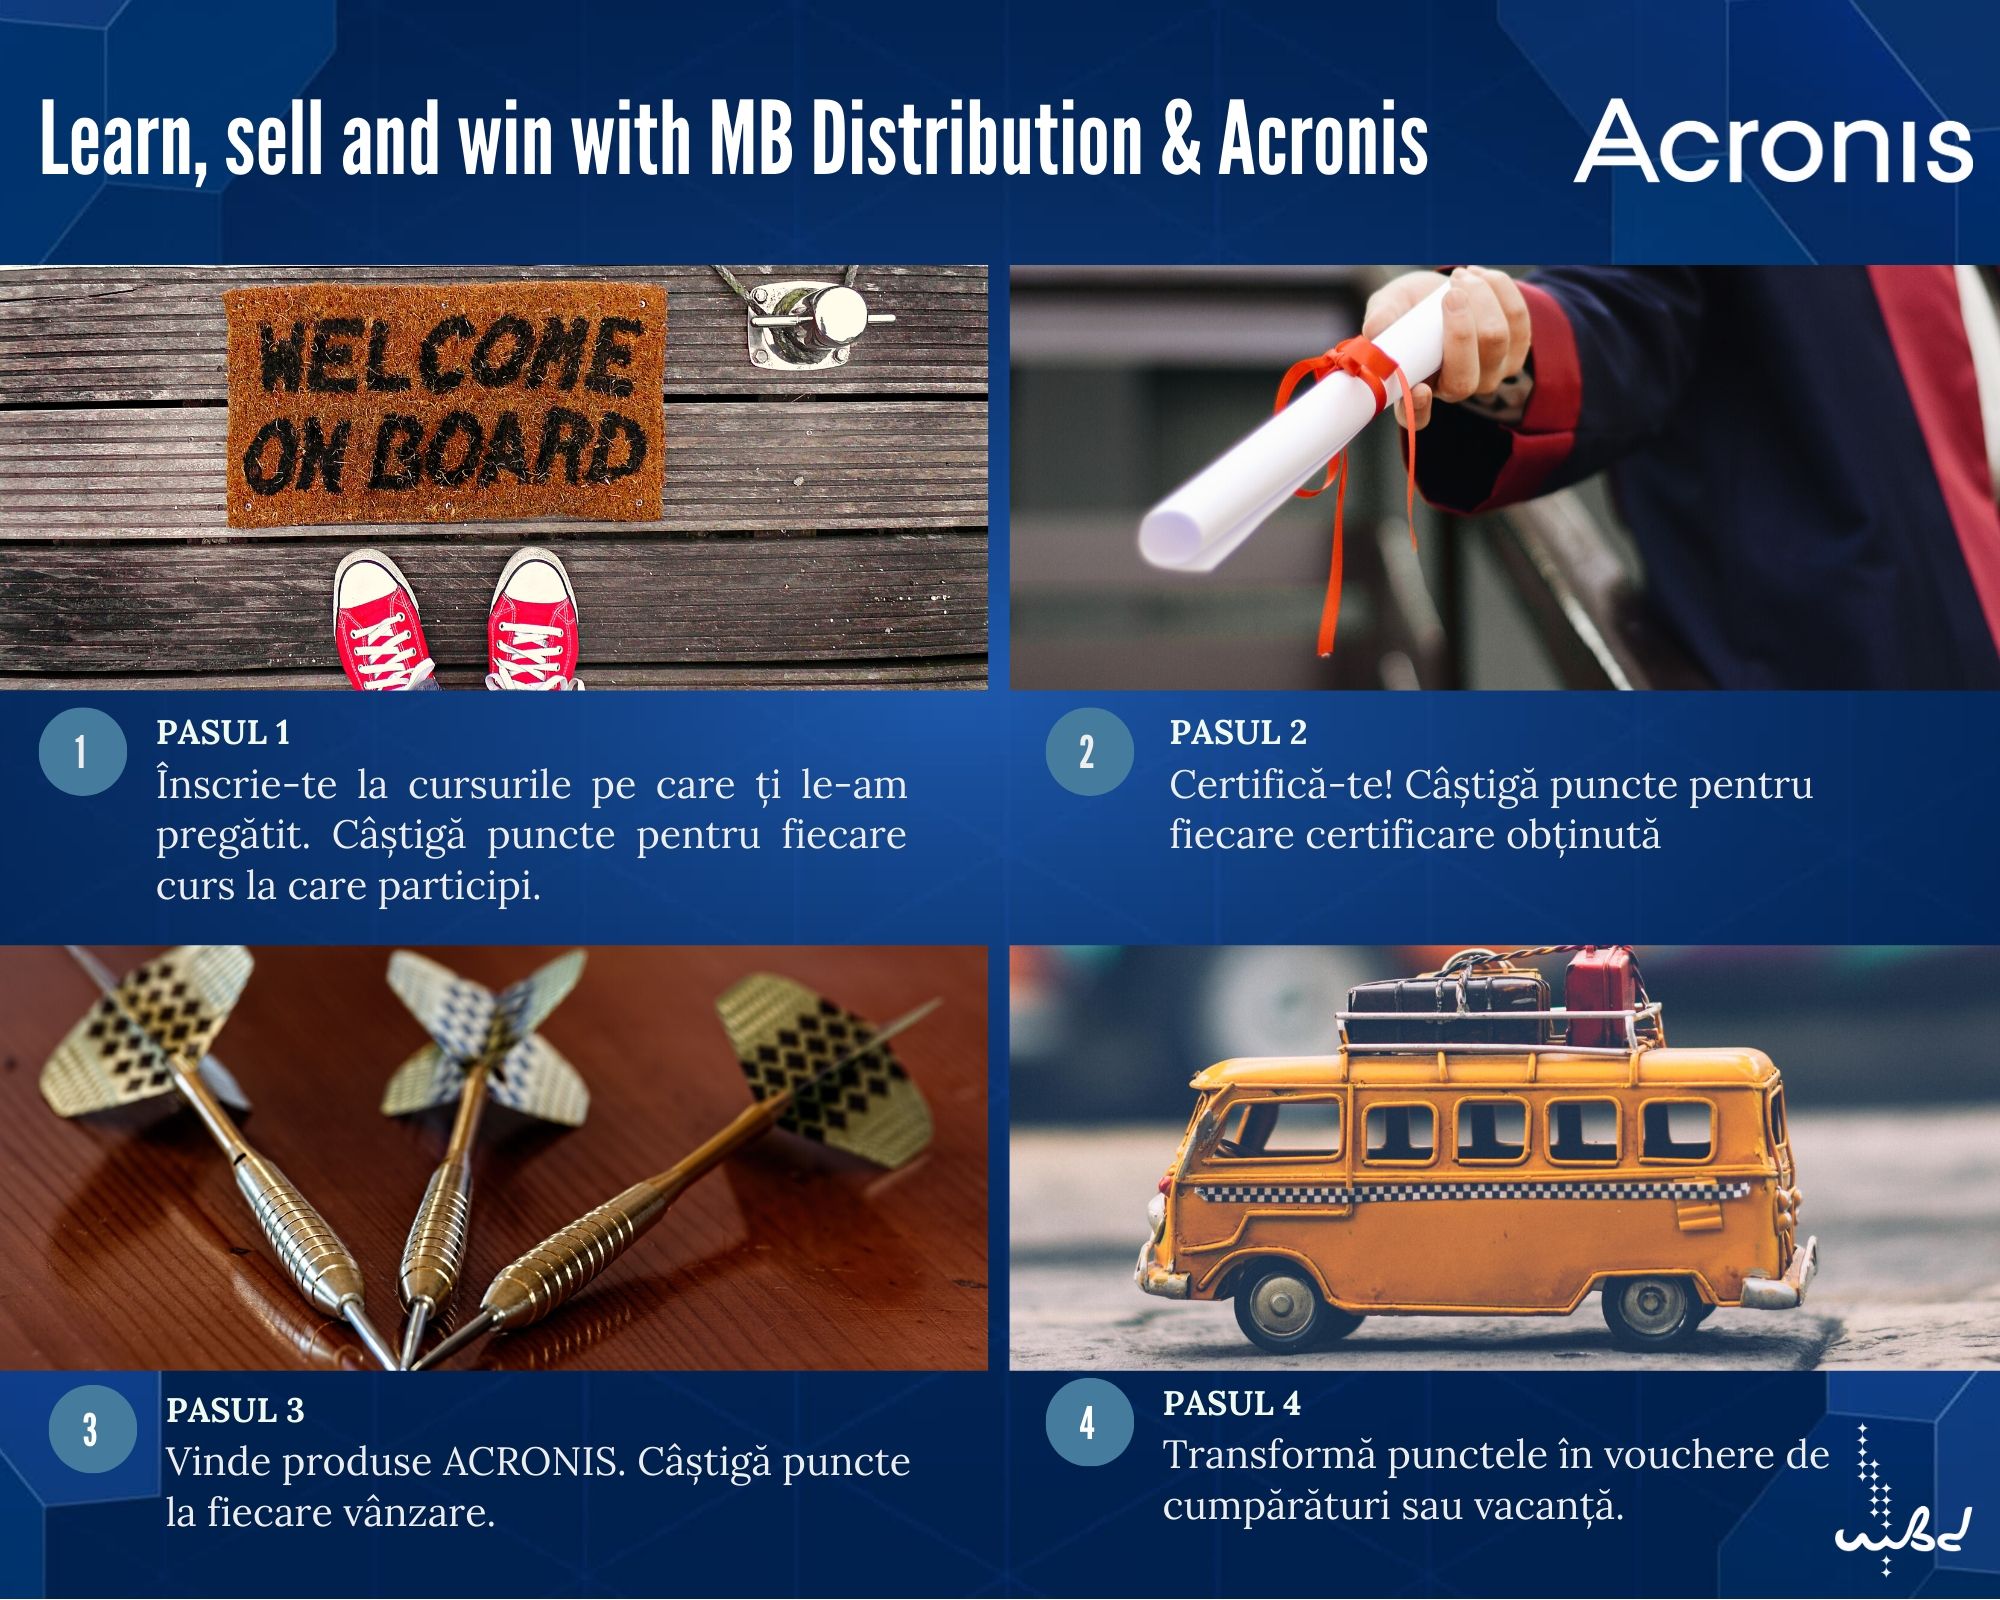 Acronis Learn, sell and win